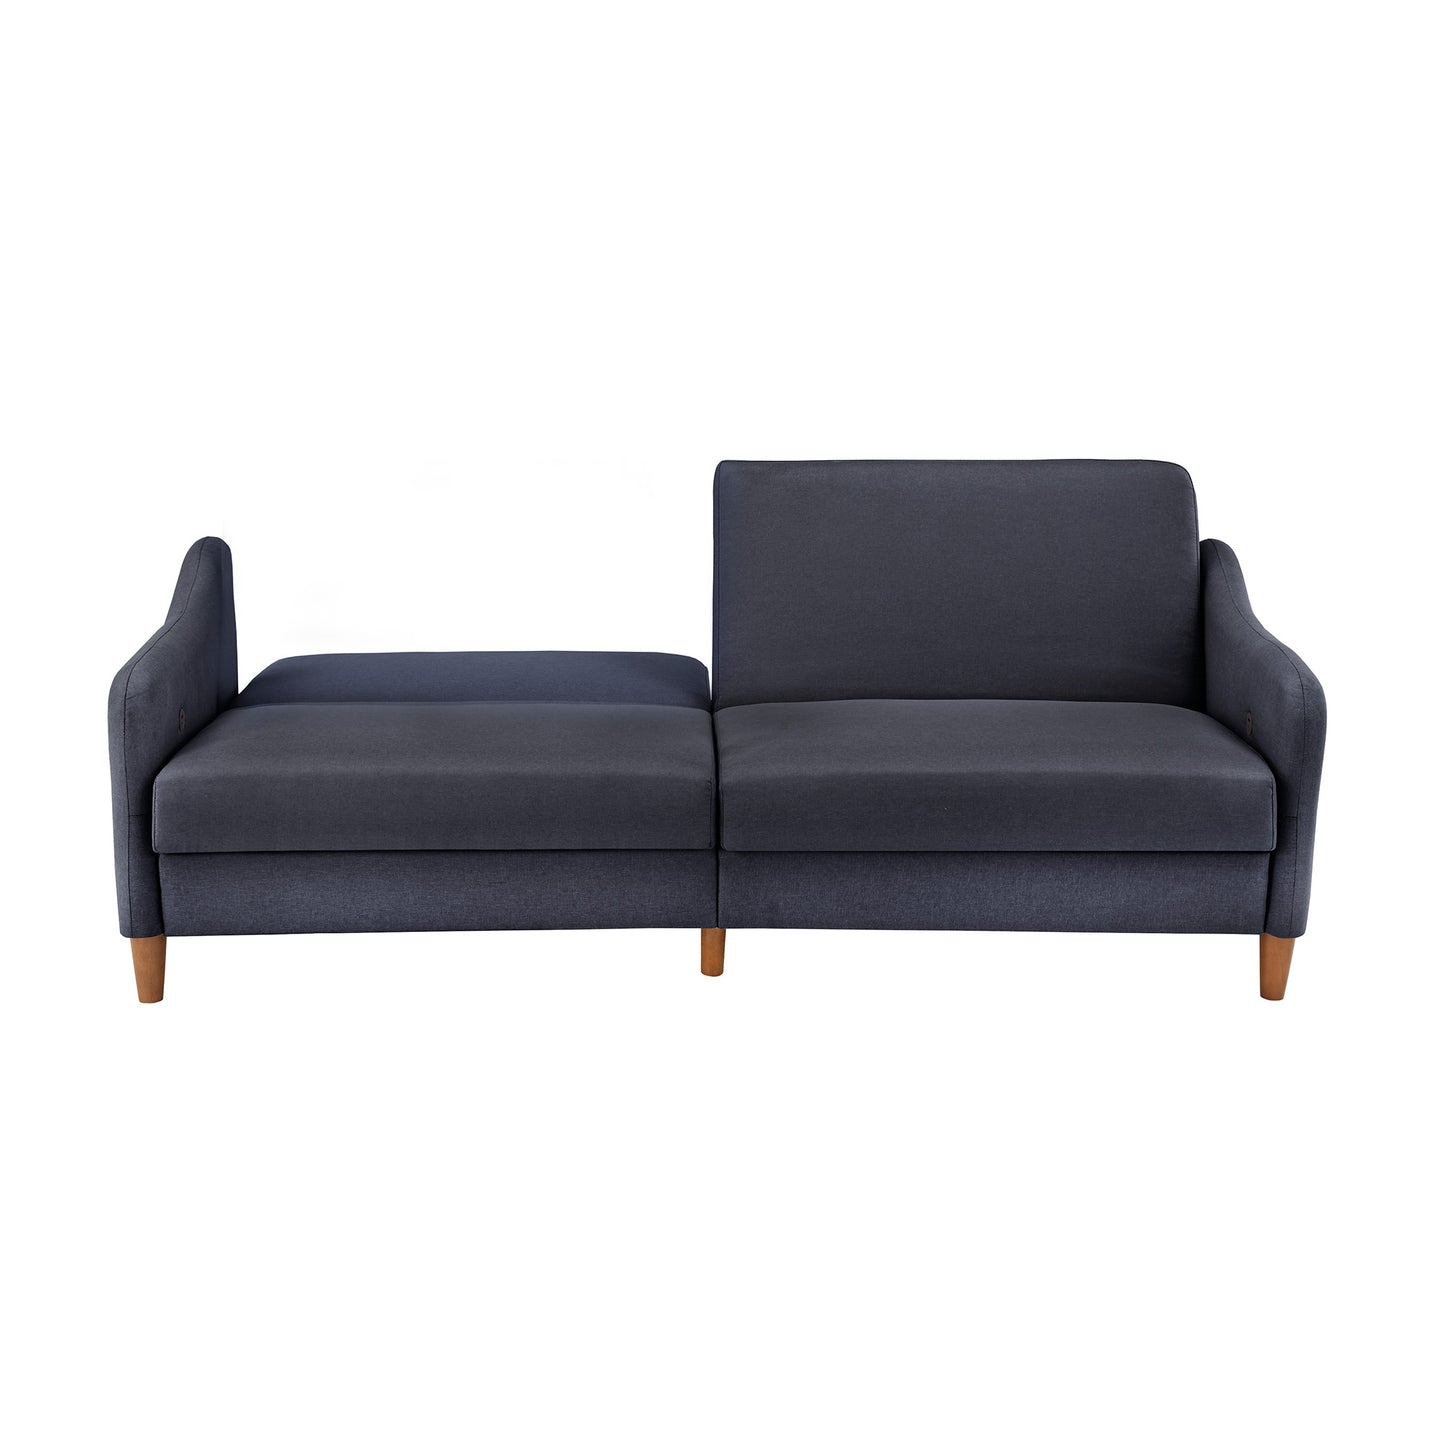 Upholstered Linen Convertible Split-Back Futon Sofa Bed with USB Charging Ports - Navy Blue